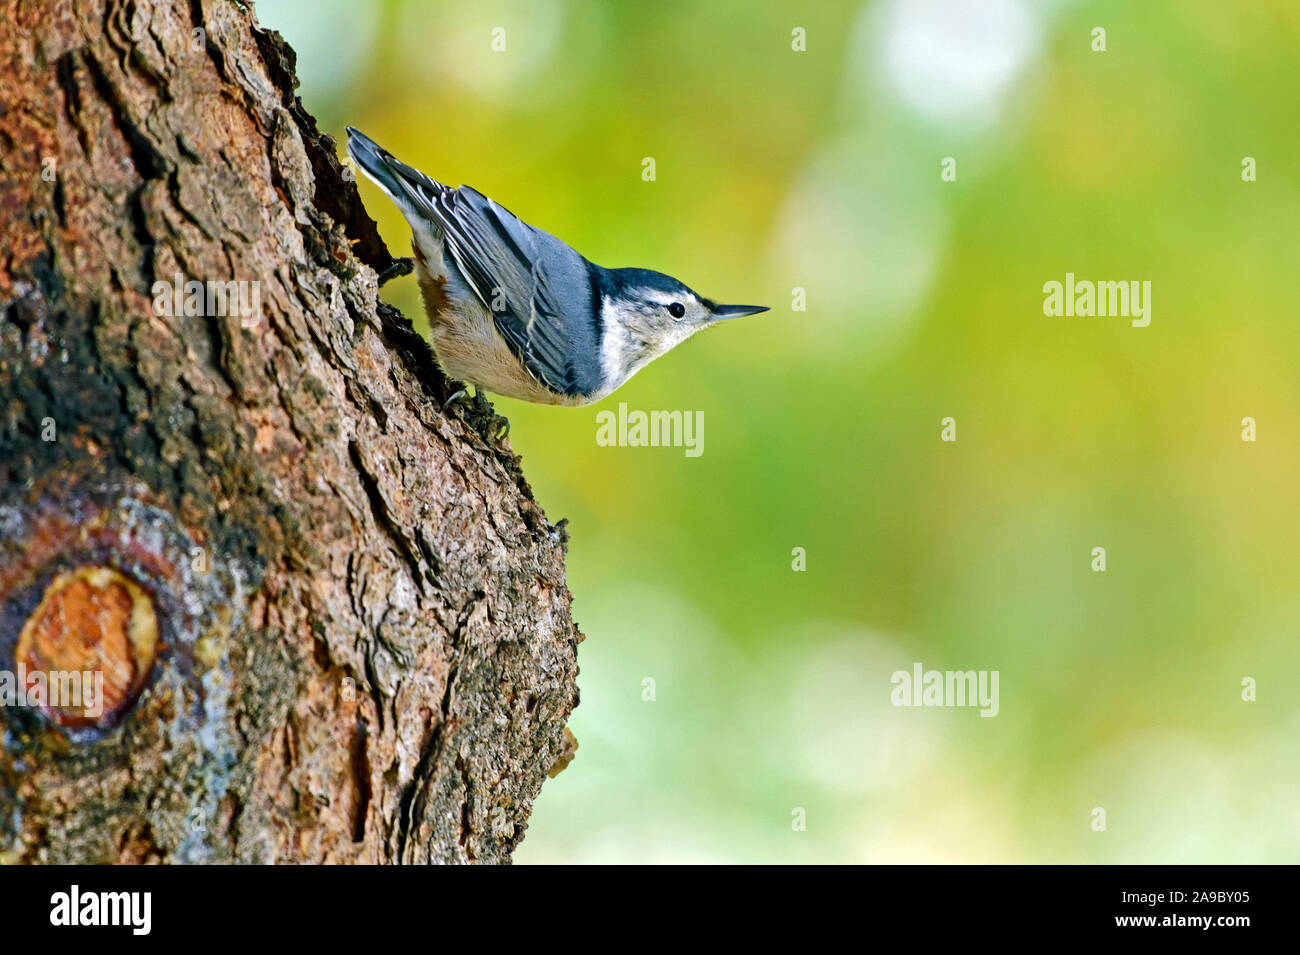 A white-brested nuthatch 'Sitta carolinensis', walking upside down on a spruce tree trunk in rural Alberta Canada. Stock Photo